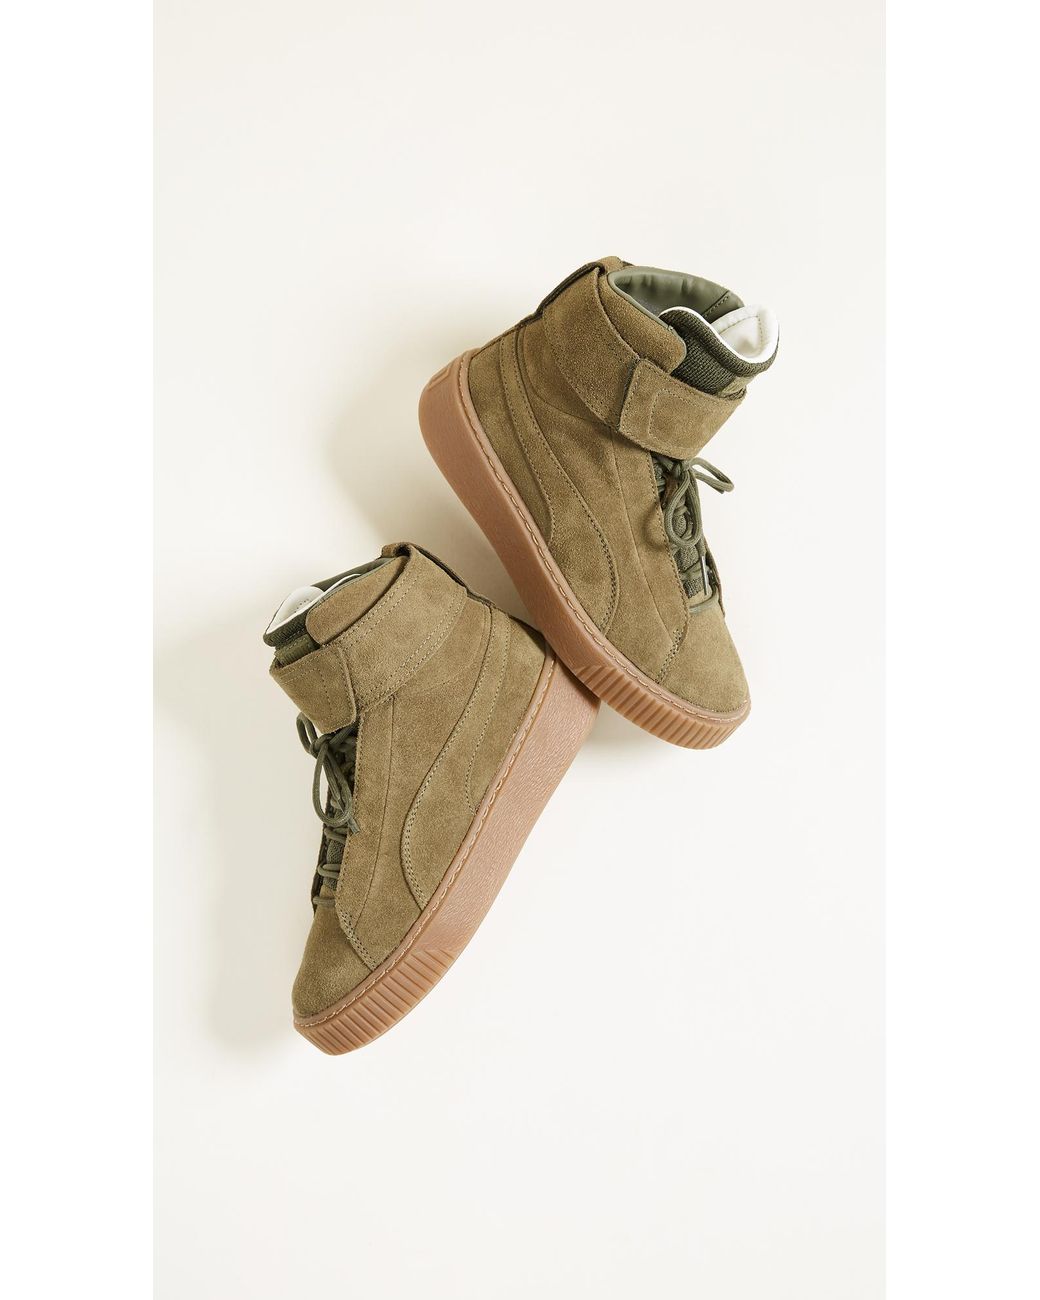 PUMA Suede Platform Mid Ow Sneakers in Olive Night/Olive Night (Green) |  Lyst